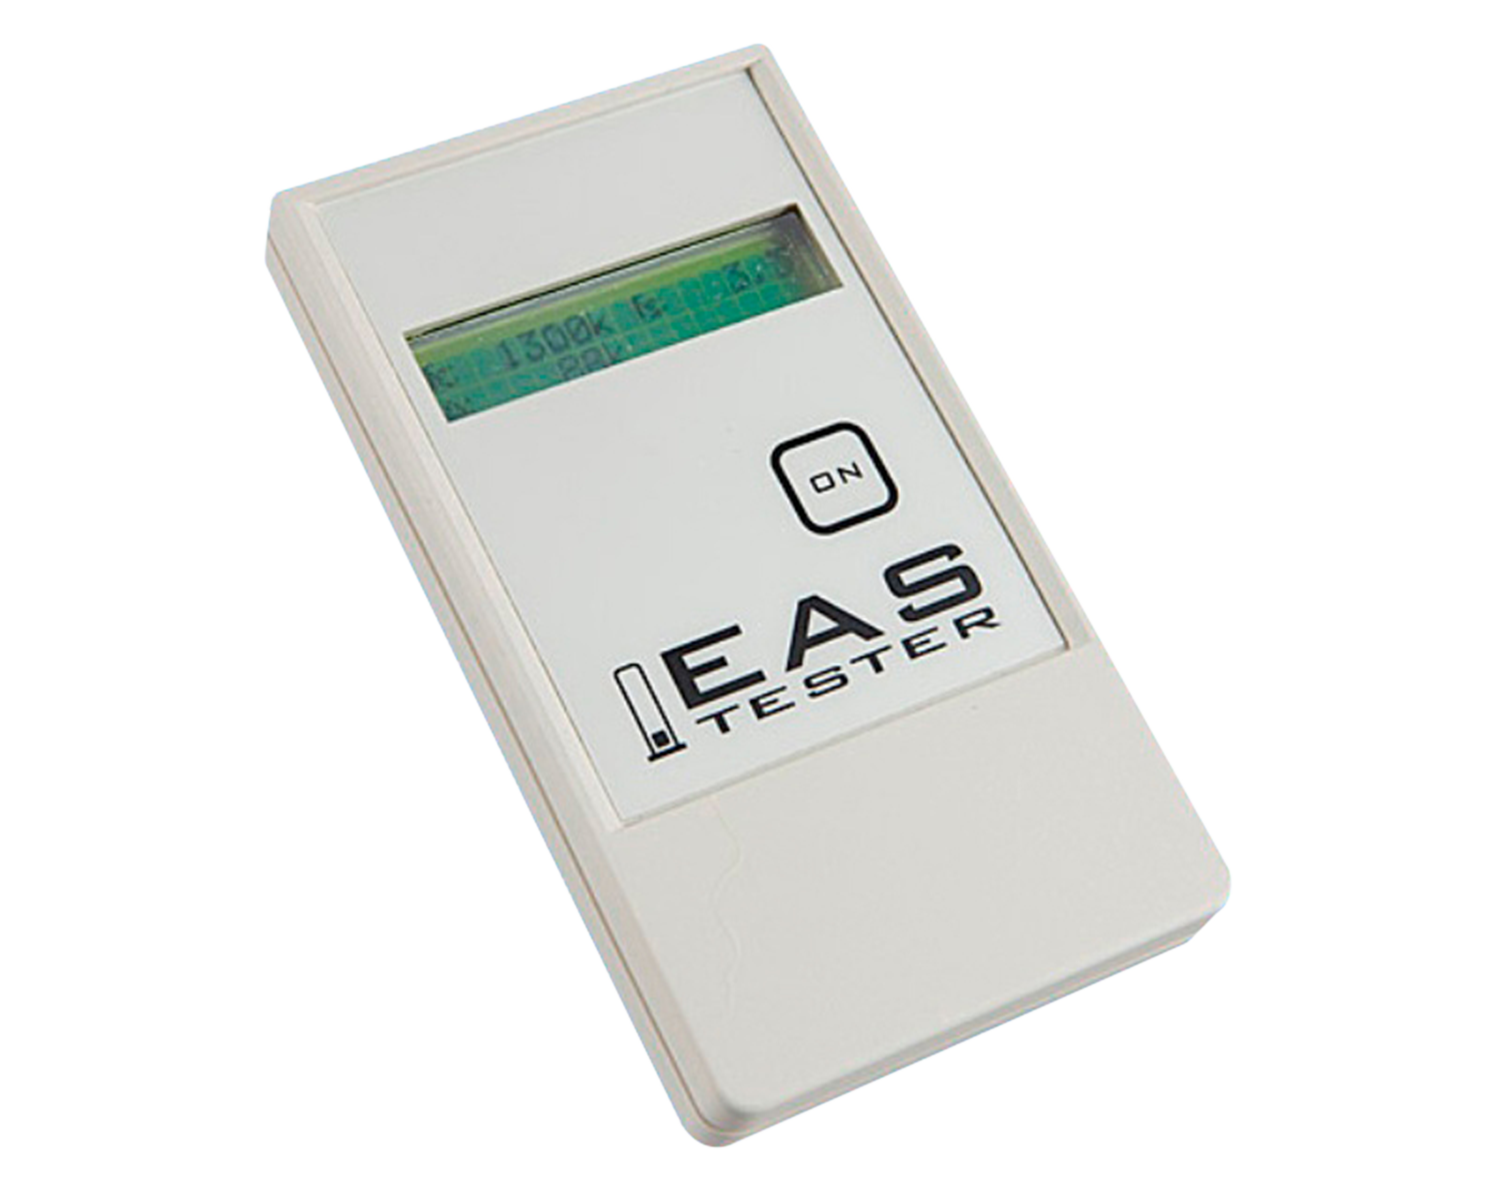 The EAS Tester: a must have for every technician installing RF electronic article surveillance systems. Within a fraction of a second, the EAS Tester provides you with instant information about the systems' center frequency, the sweep width and the sweep frequency, all on one display.